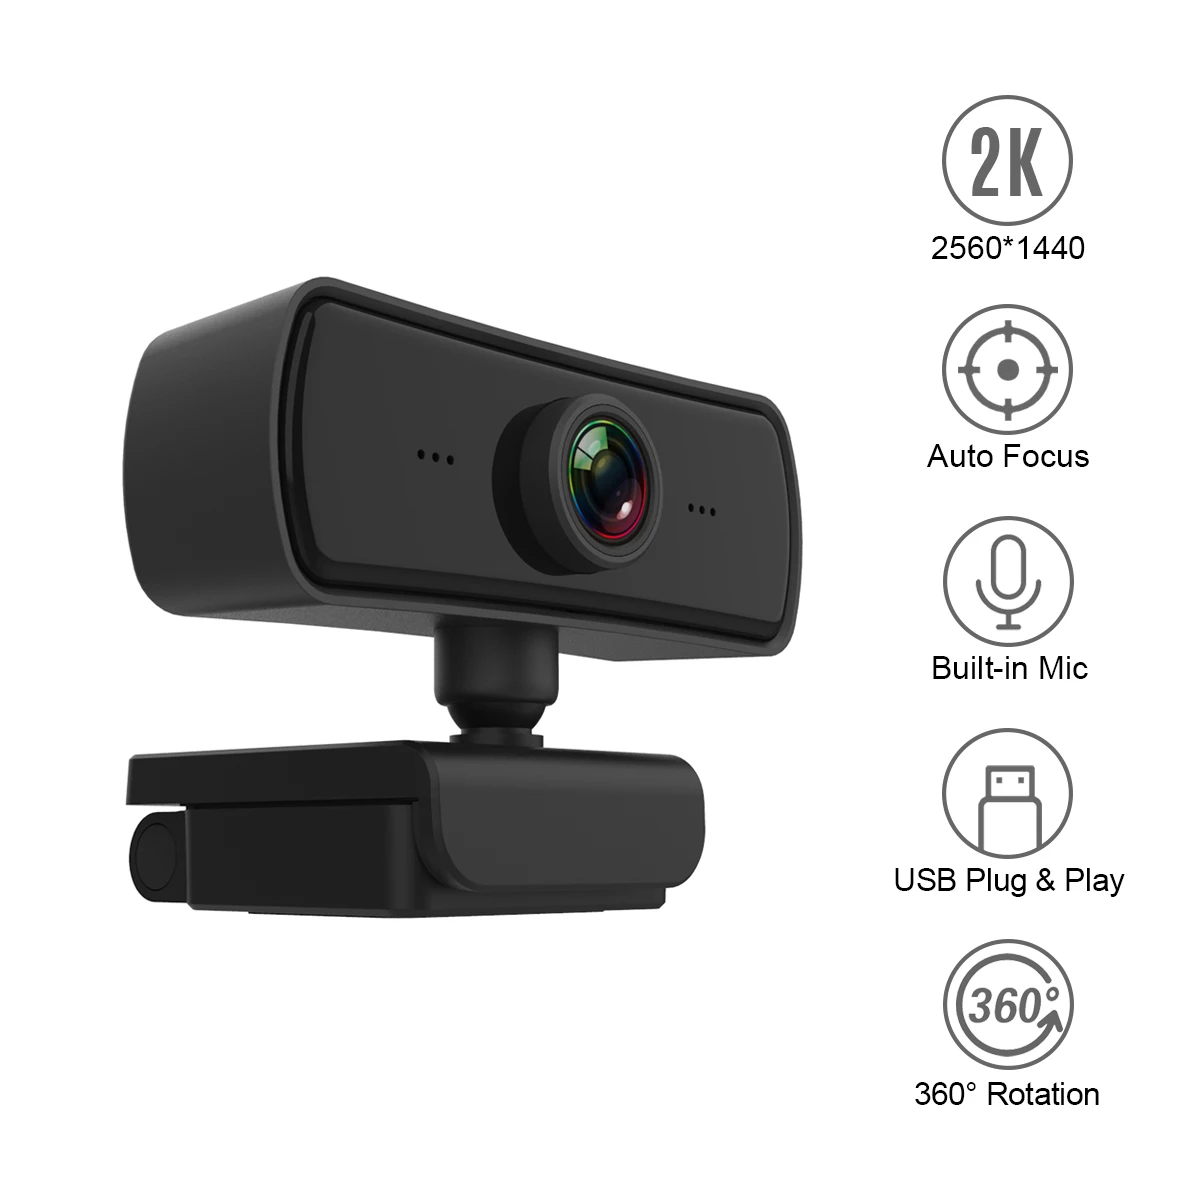 

1080P HD Computer Camera Video Conference Camera Webcam 2K Resolution Auto Focus 360 Rotation H.264 Video with Microphone